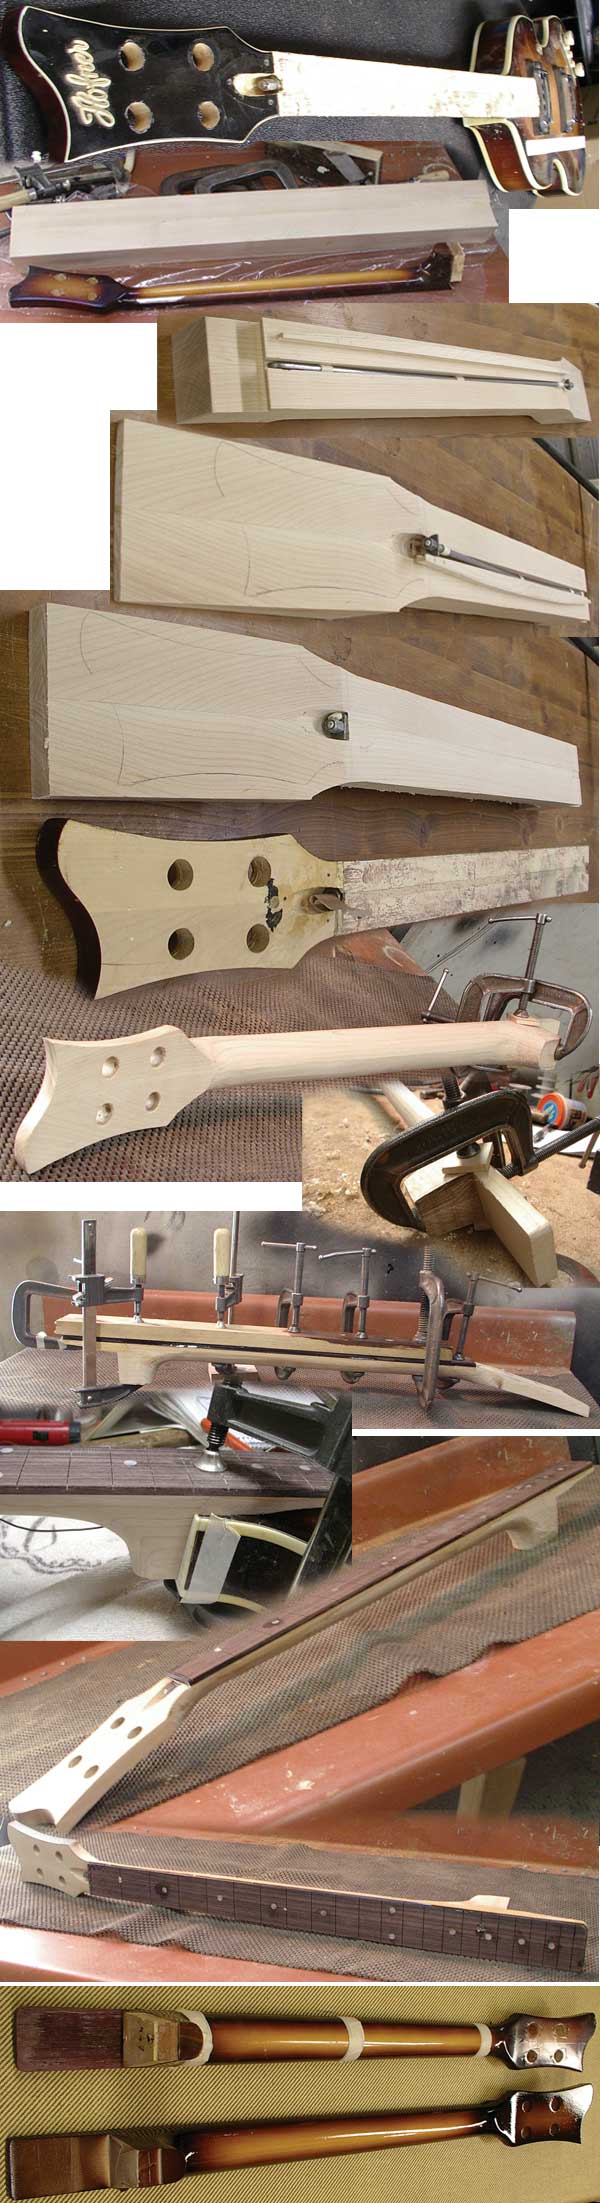 Building the neck